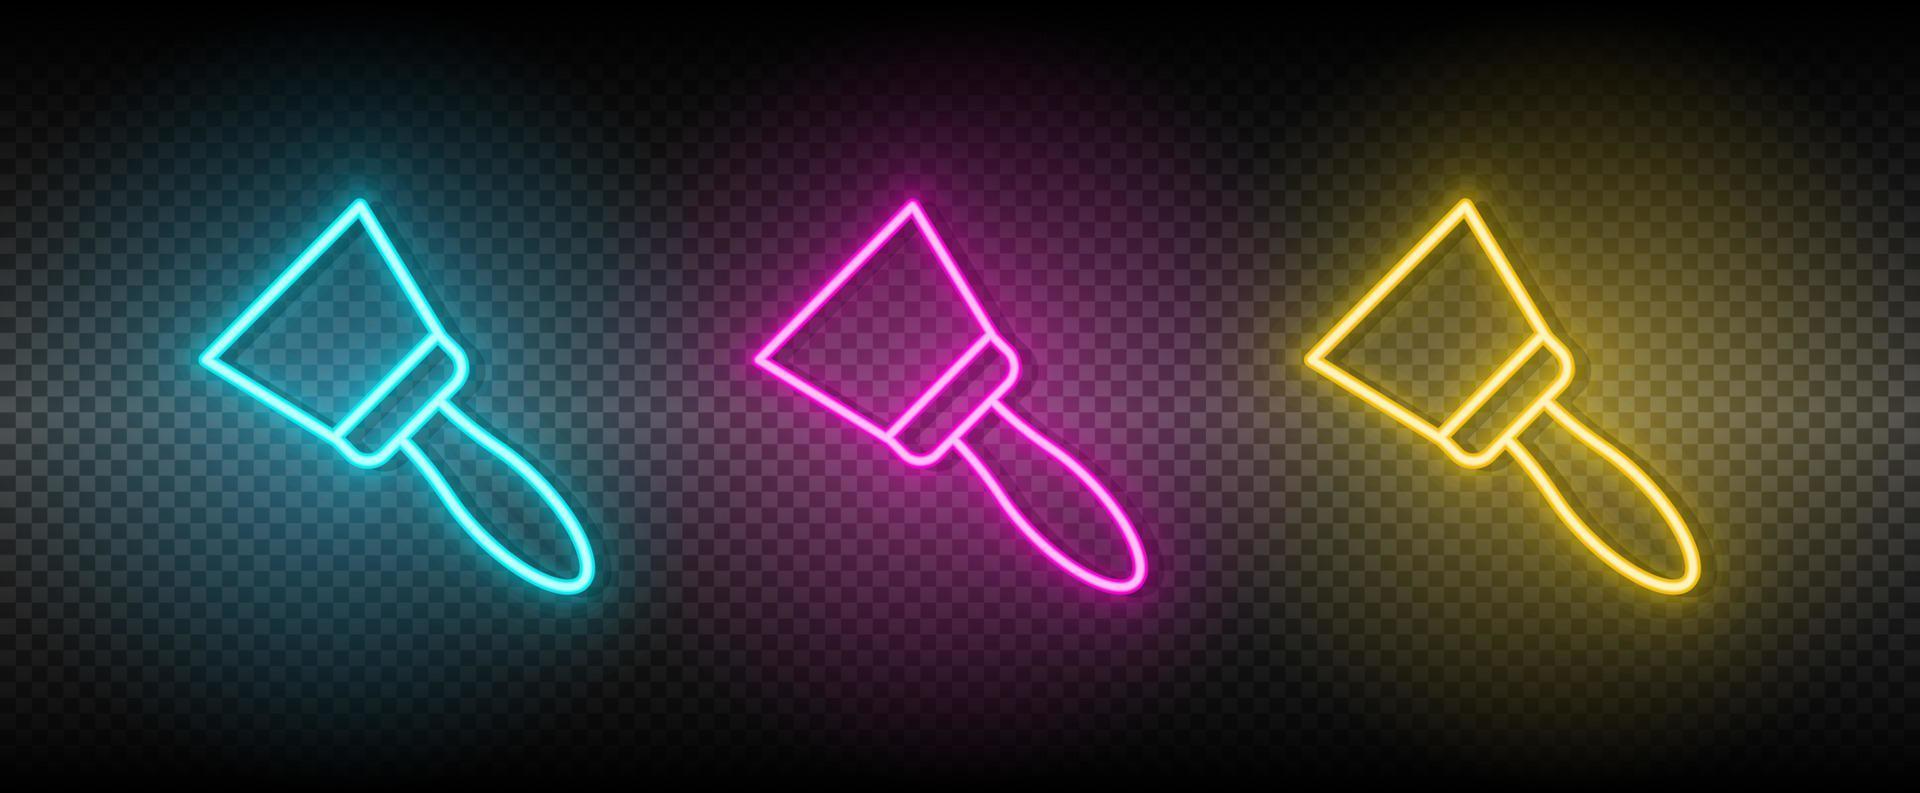 scraper, tool vector icon yellow, pink, blue neon set. Tools vector icon on dark transparency background